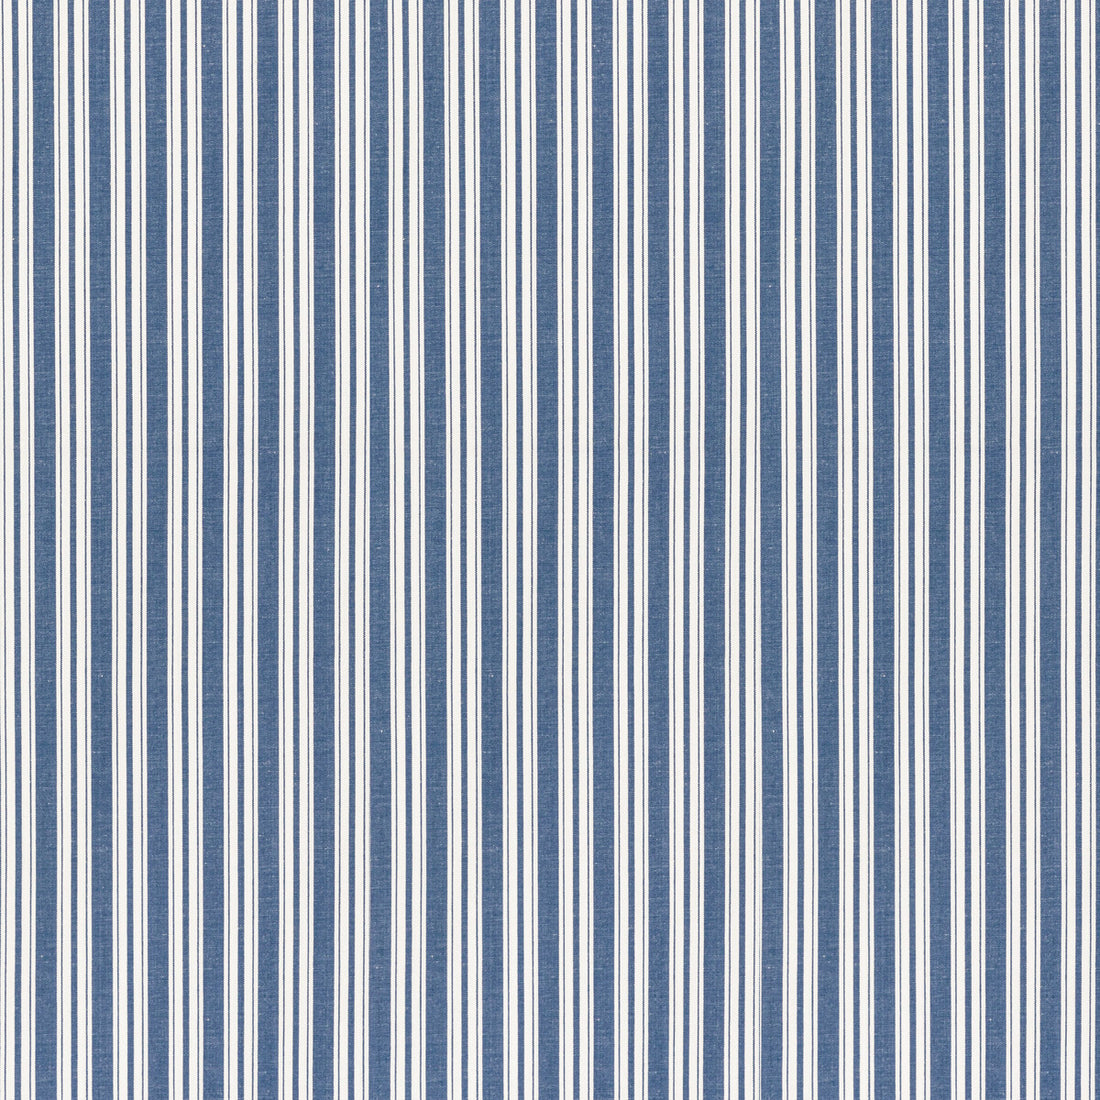 Selune Stripe fabric in blue color - pattern 8022118.5.0 - by Brunschwig &amp; Fils in the Normant Checks And Stripes II collection